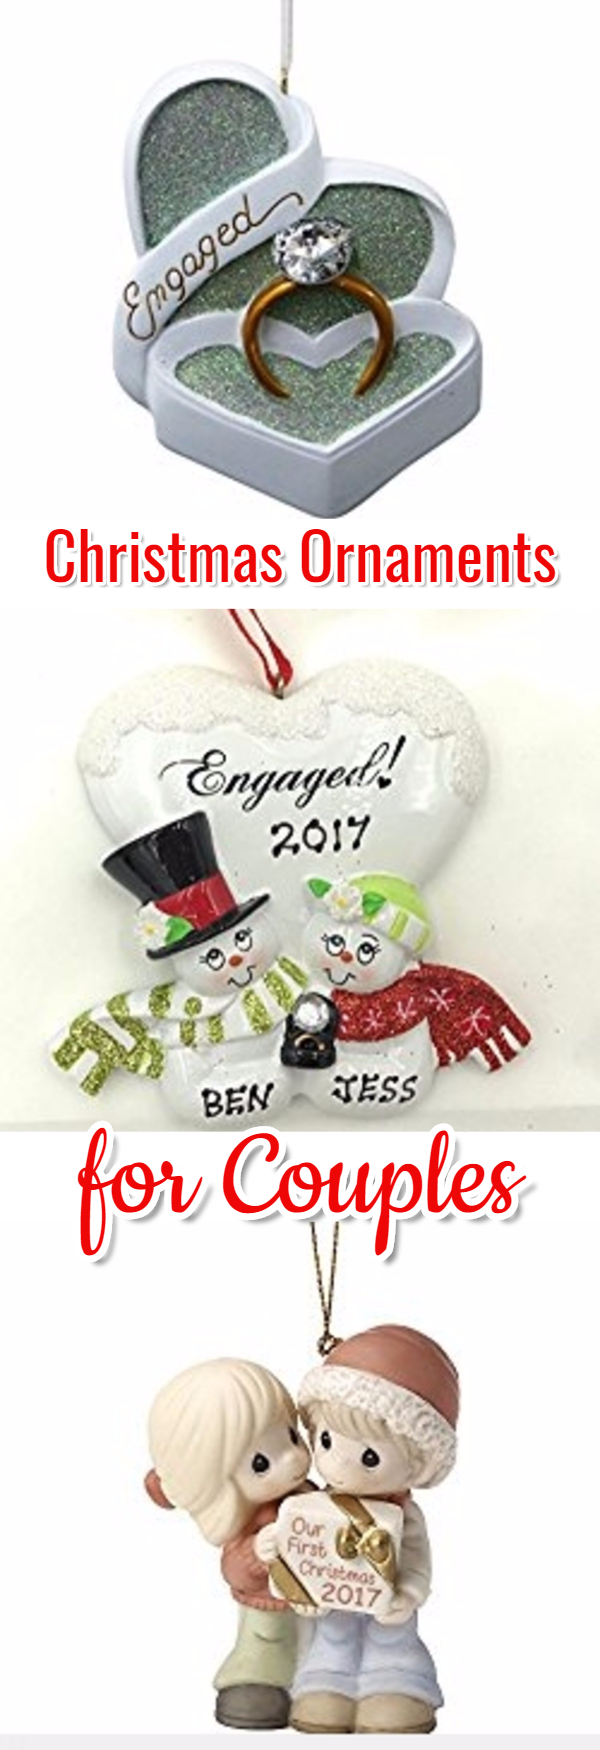 Christmas ornaments for couples - First Christmas married, newlyweds, engaged, first Christmas together and more